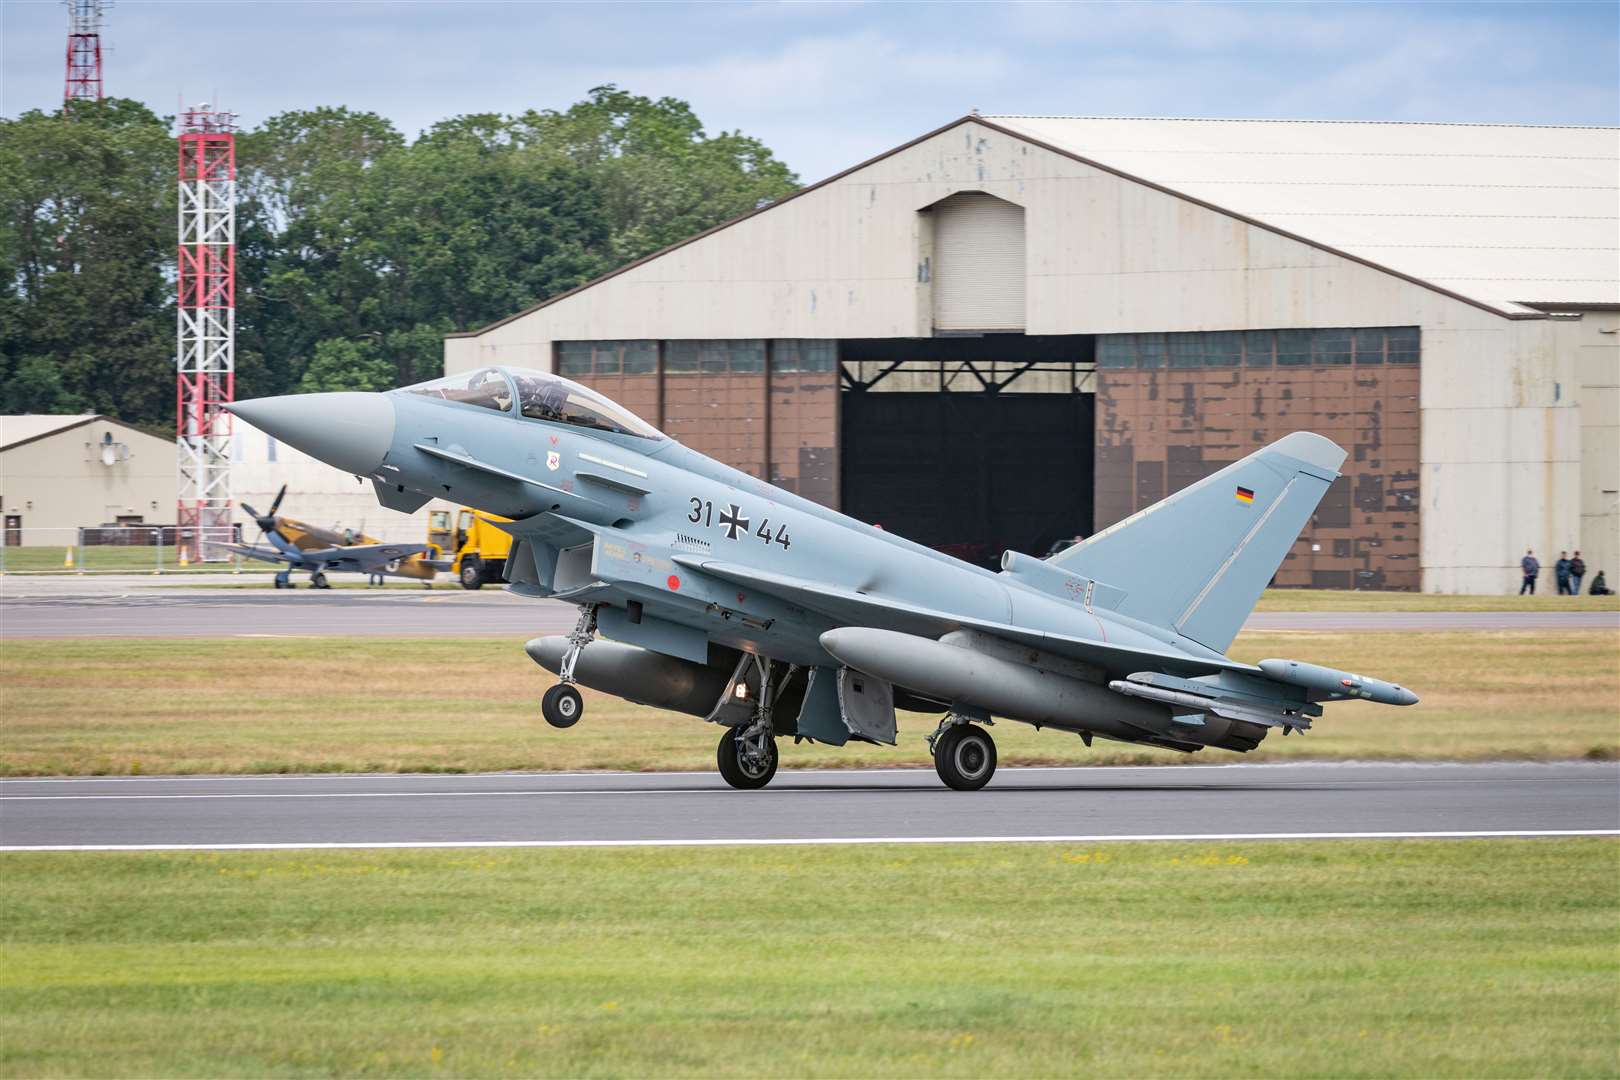 A Eurofighter Typhoon - one of the projects BAE Systems has been involved in. Picture: Mark Wright/BAE Systems